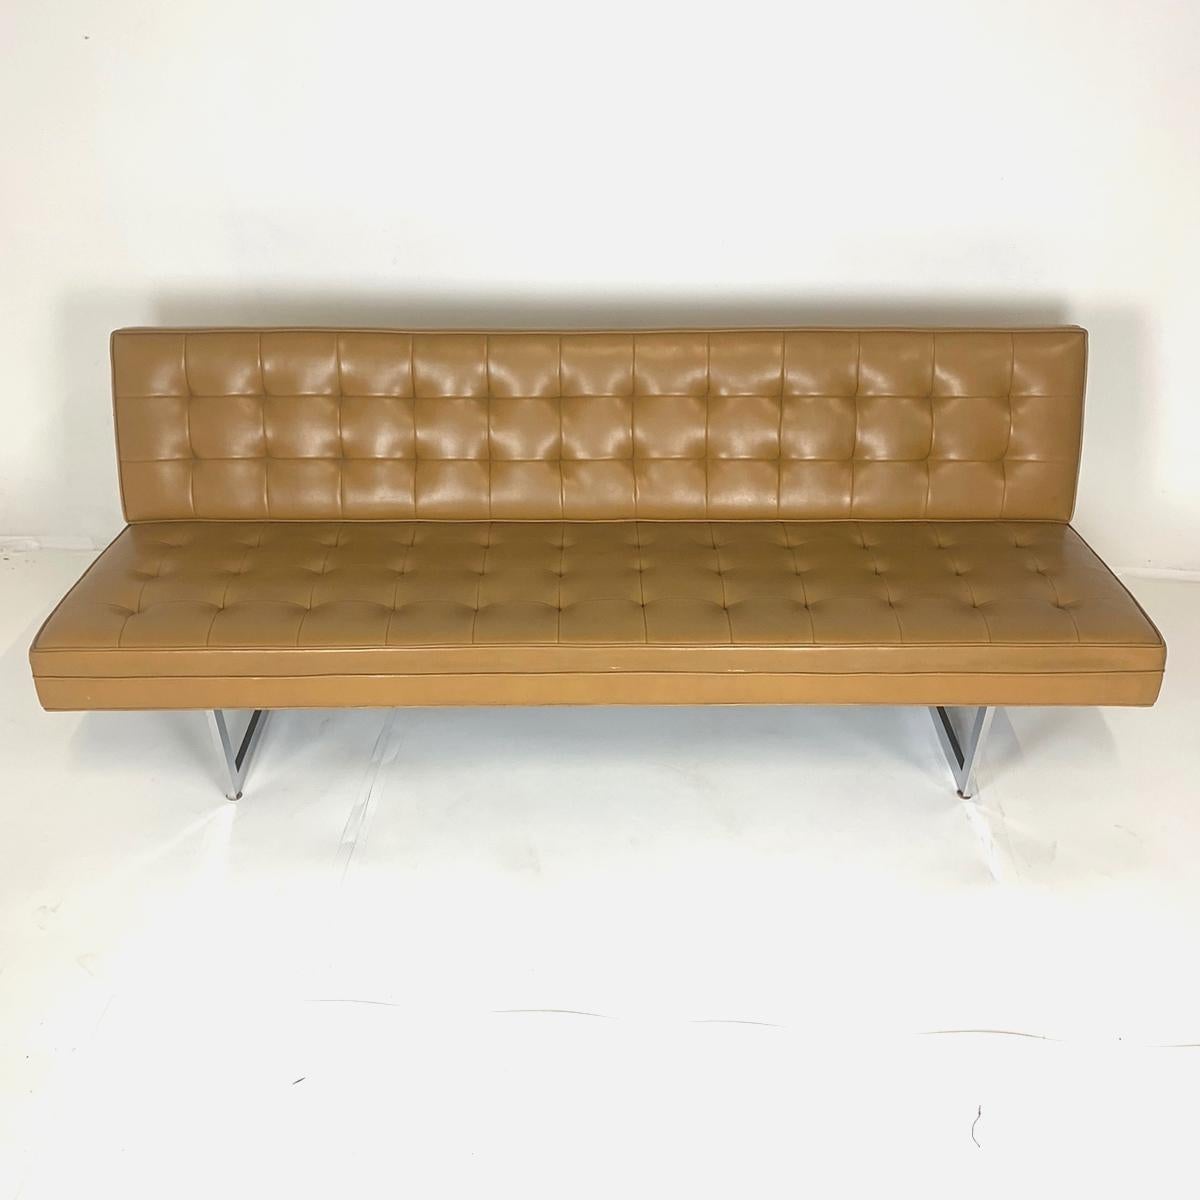 Gorgeous example of Mid-Century Modern in a sleek and sturdy sofa. Great for home, office, or gallery. A luggage or camel colored tufted Naugahyde upholstery with a steel frame. Simply stunning. Made by Patrician Furniture.